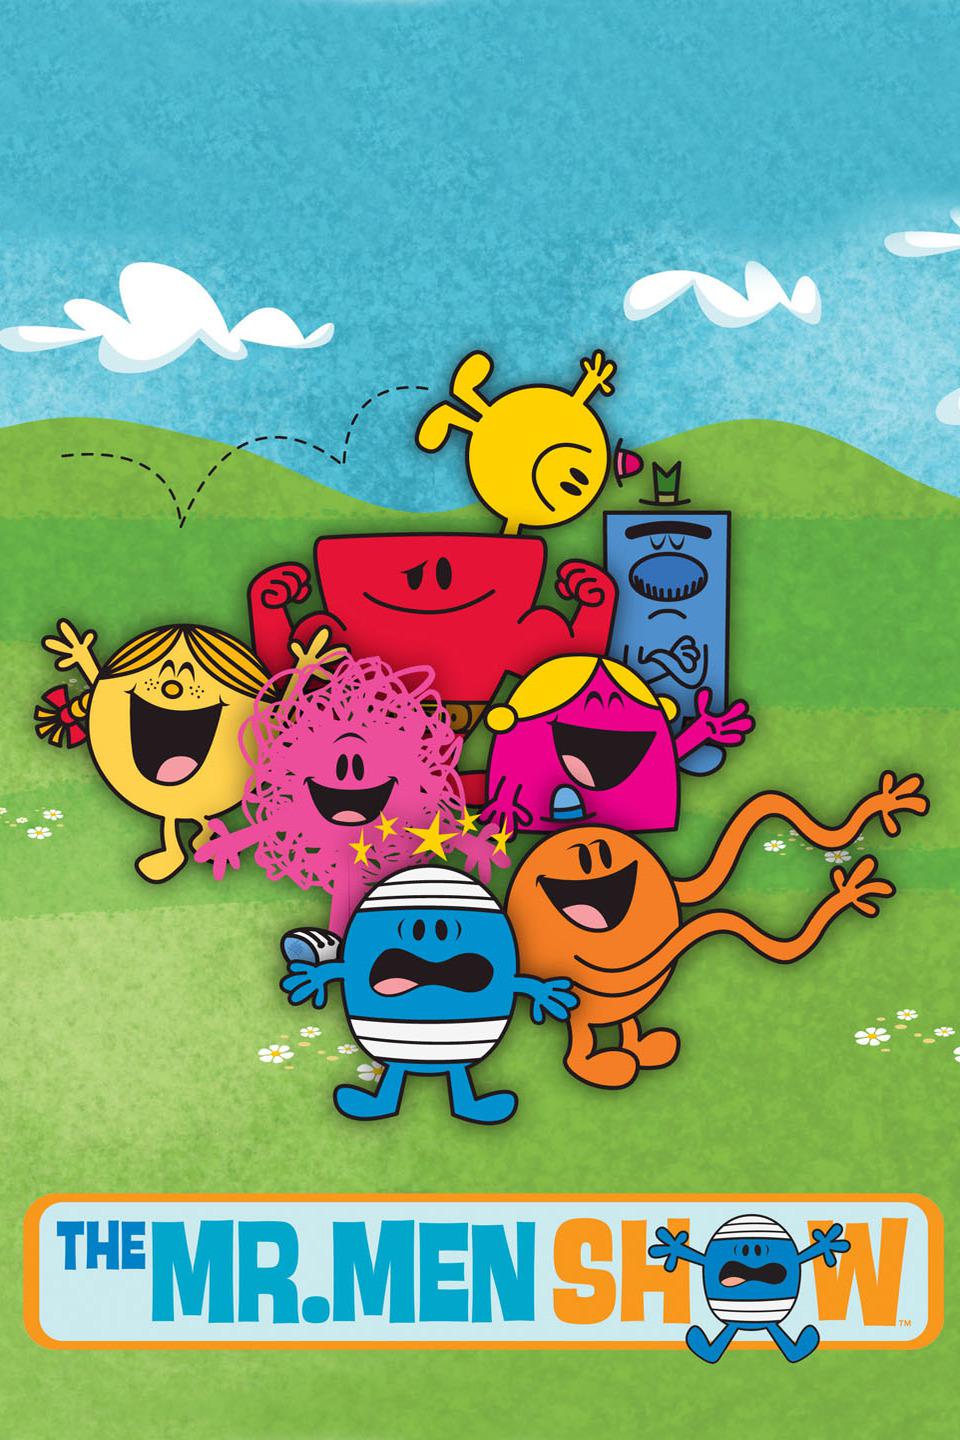 The Mr. Men Show (Channel 5): United States daily TV audience